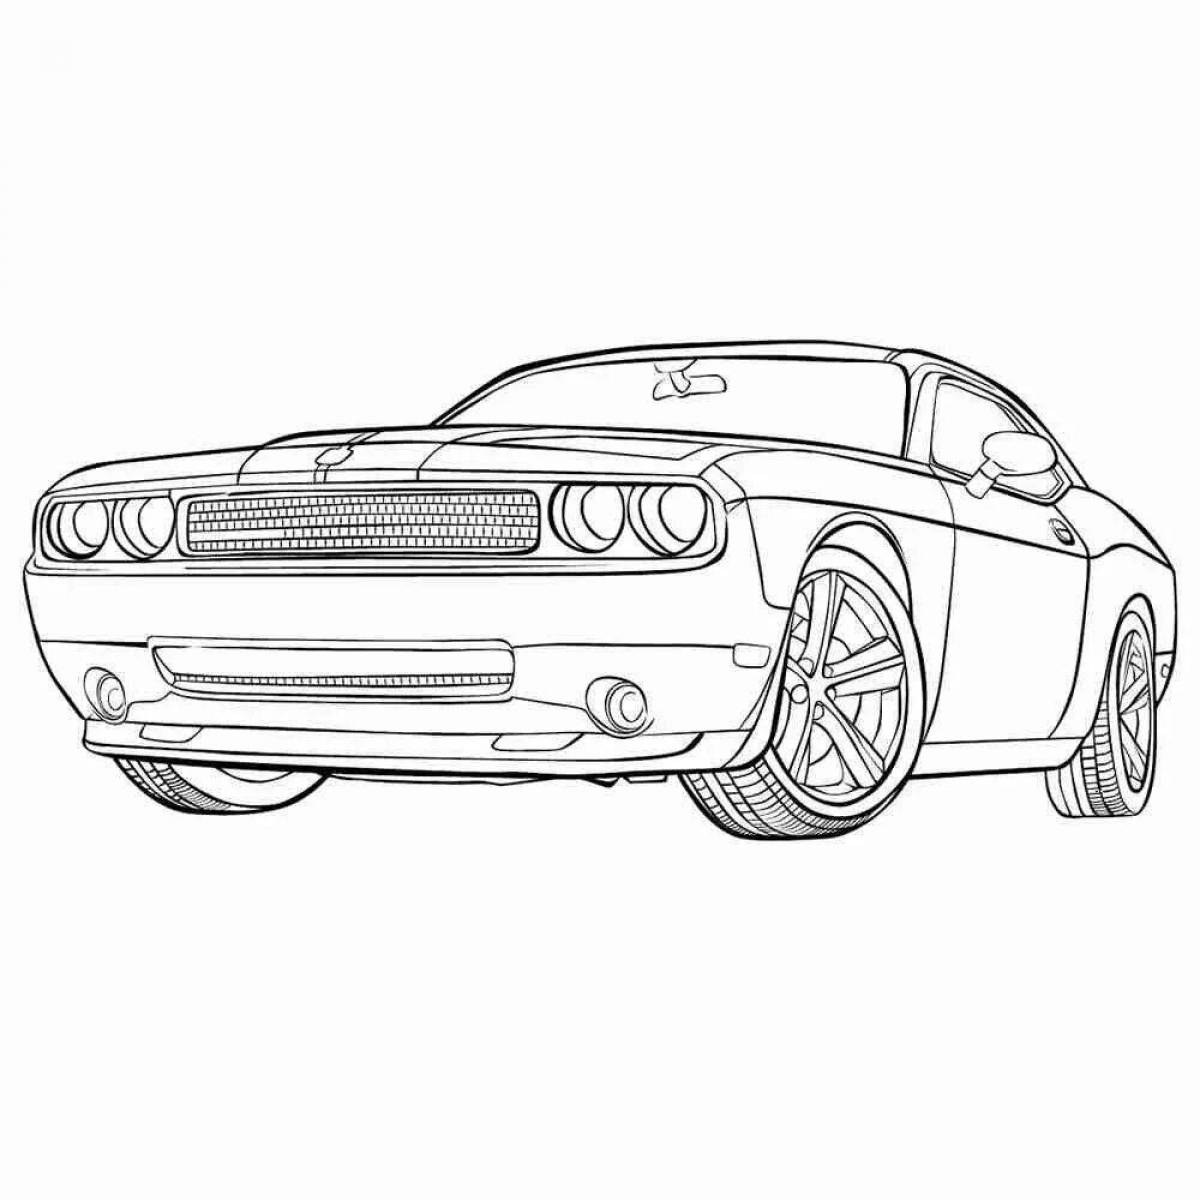 Adorable dodge coloring book